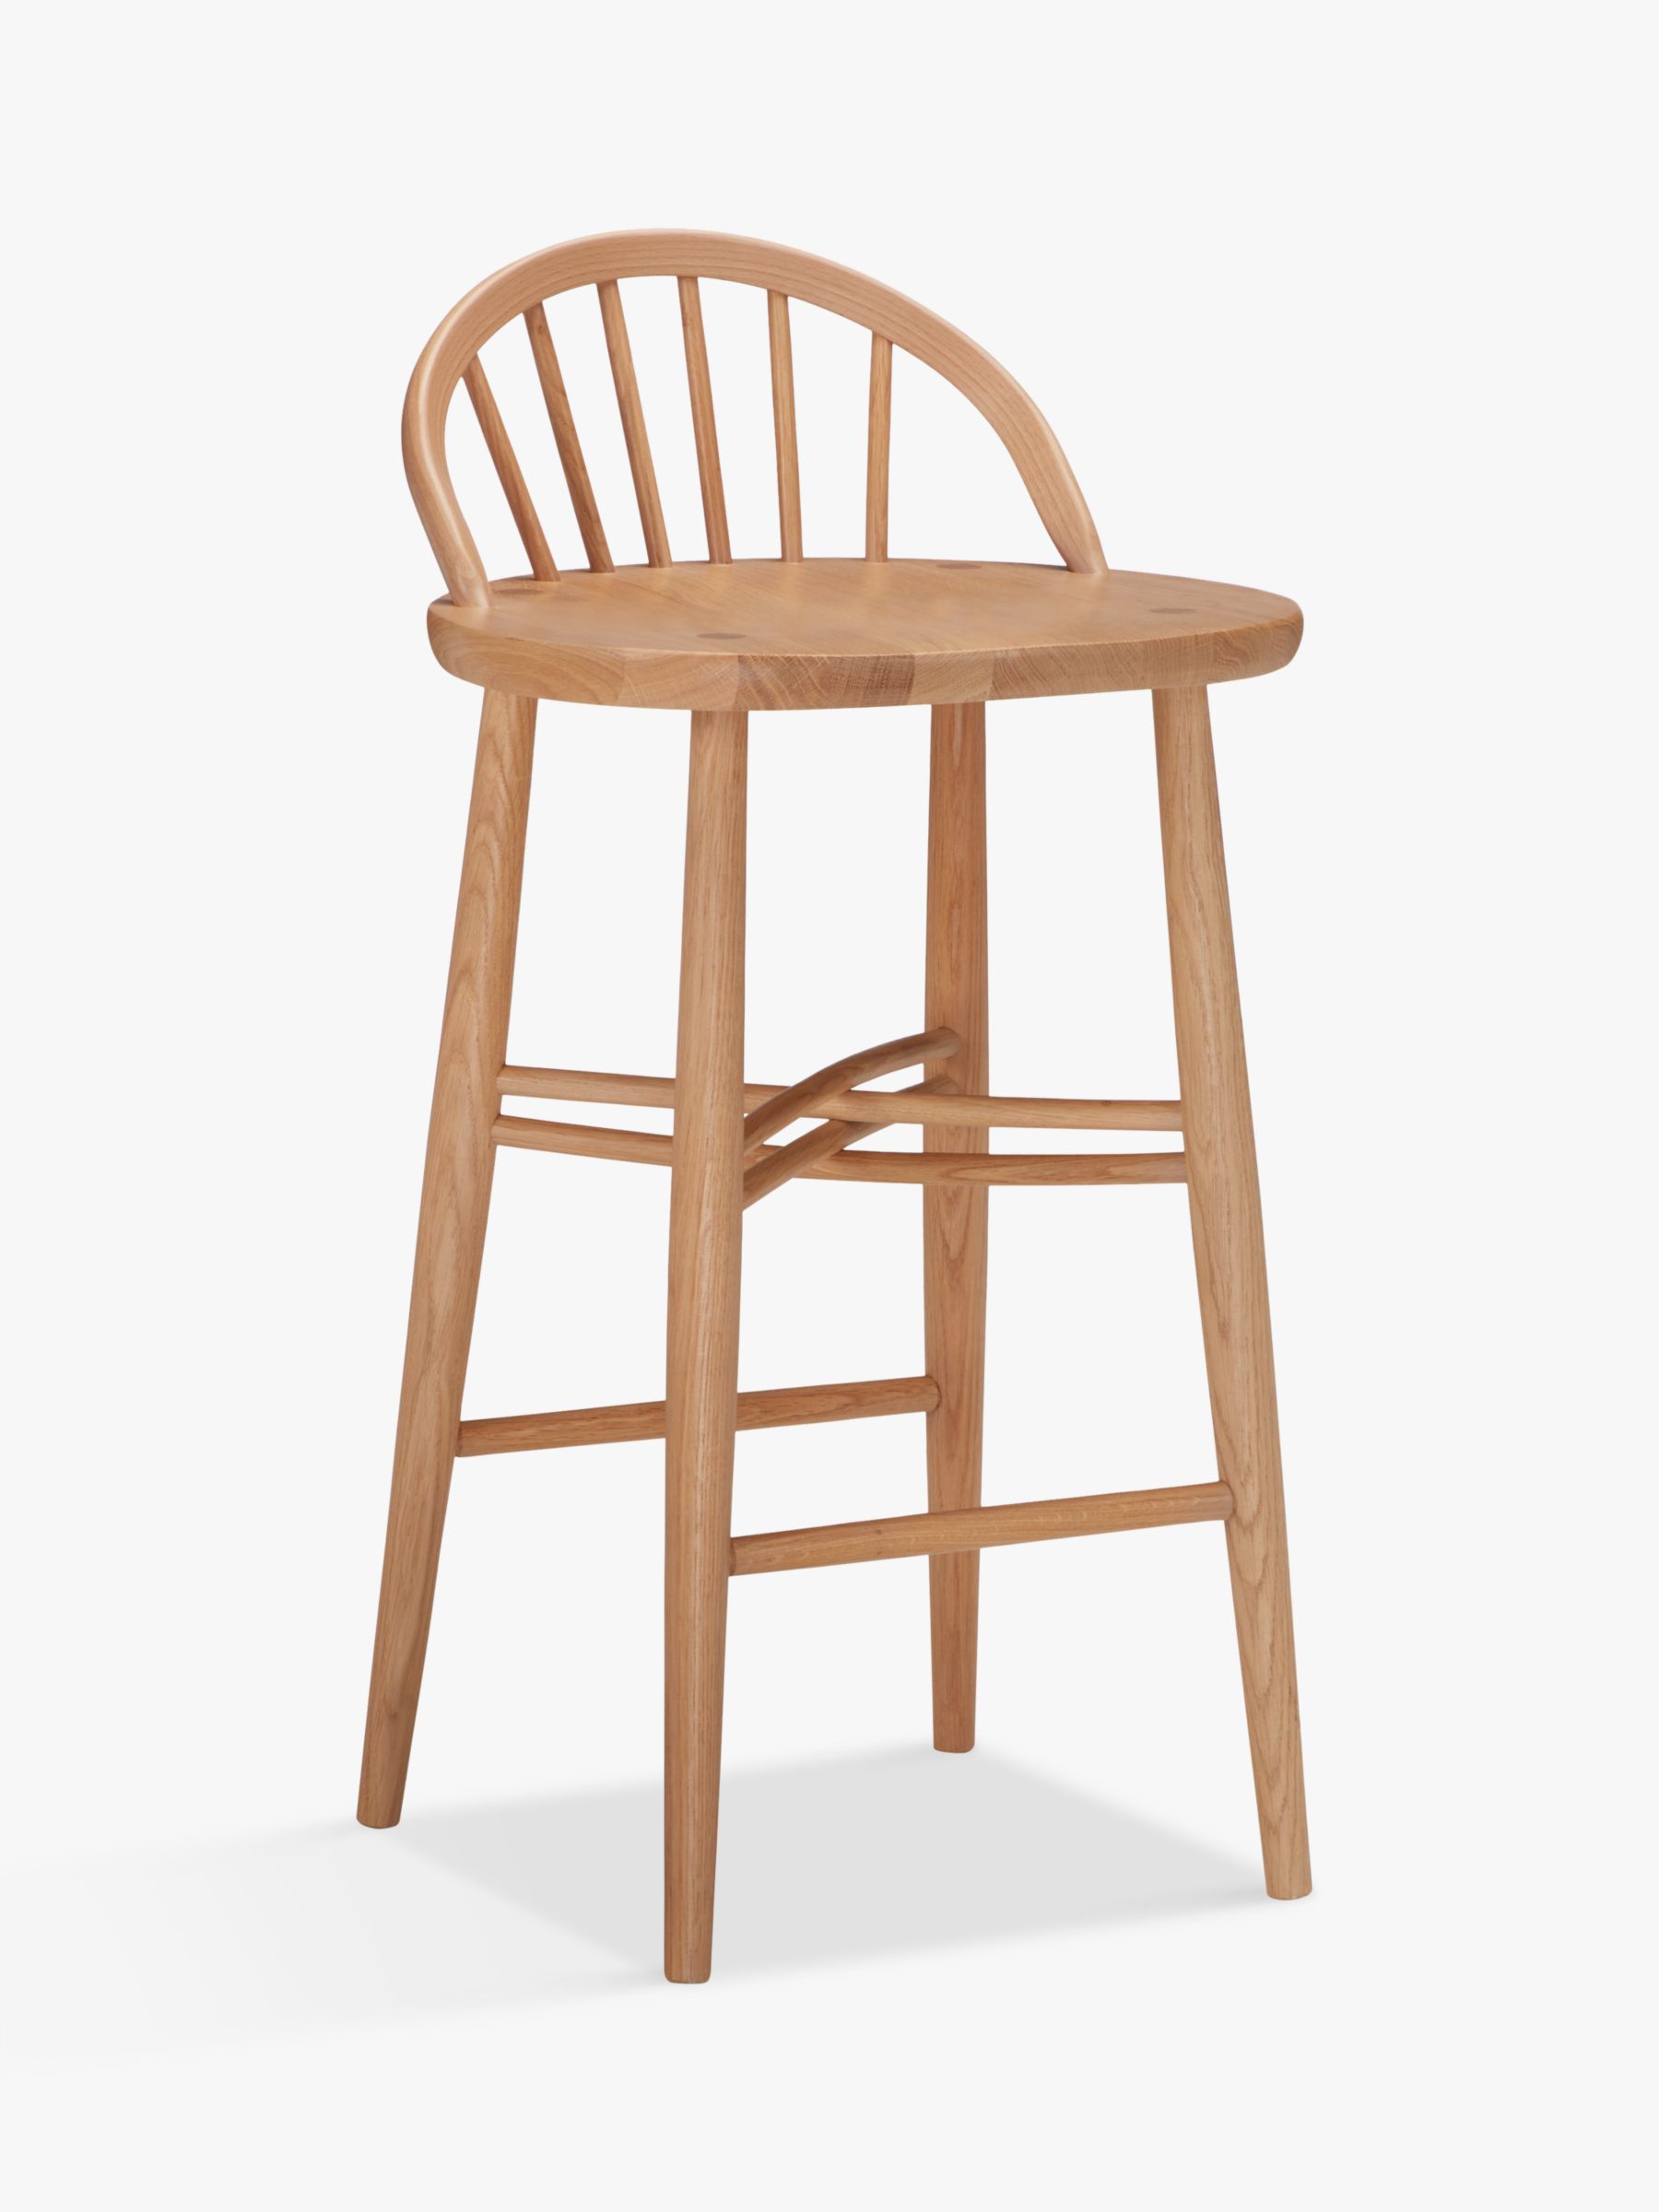 ercol for John Lewis Shalstone Bar Stool Review